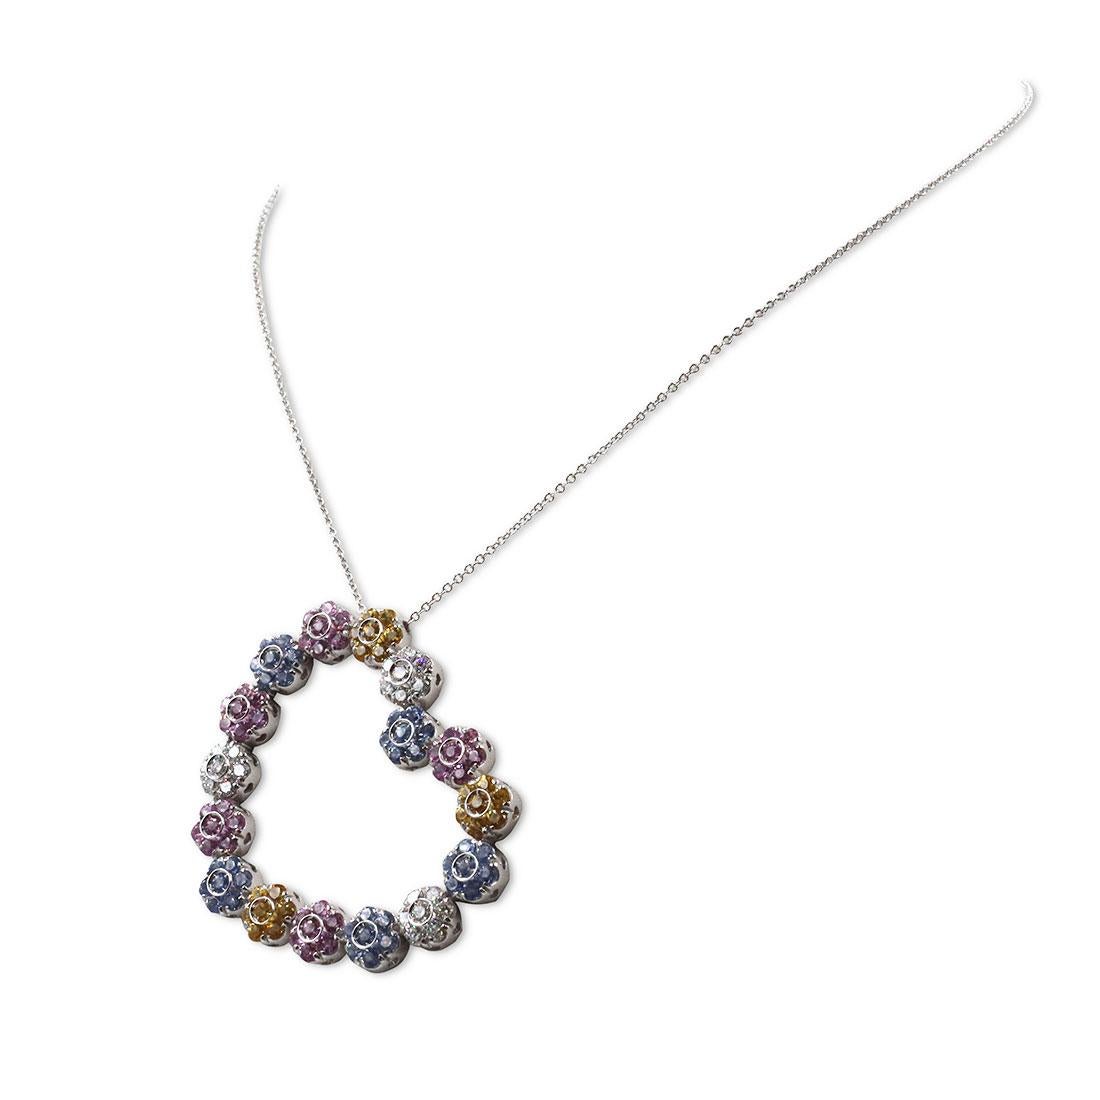 Authentic Pasquale Bruni necklace crafted in 18 karat white gold.  A charming heart-shaped pendant comprised of clusters of round-cut diamonds (approximately 1.25cttw), topaz (approximately 1.40cttw), and pink and yellow sapphires (approximately